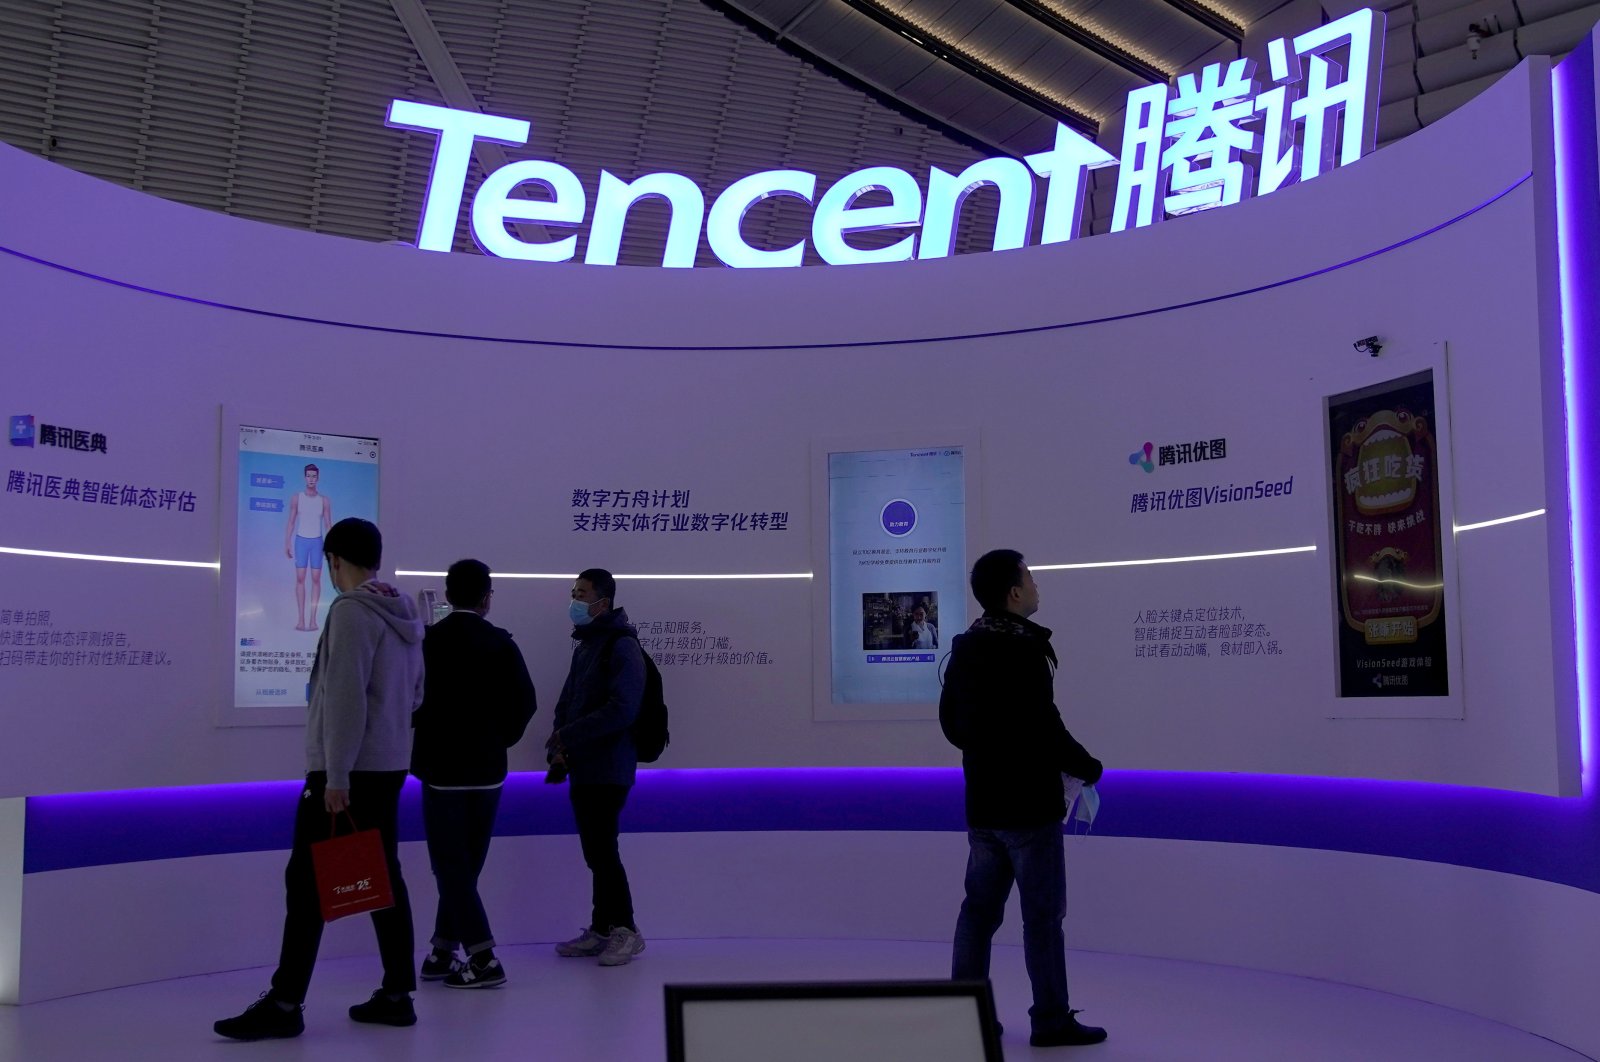 A logo of Tencent is seen during the World Internet Conference (WIC) in Wuzhen, Zhejiang province, China, Nov. 23, 2020. (Reuters Photo)